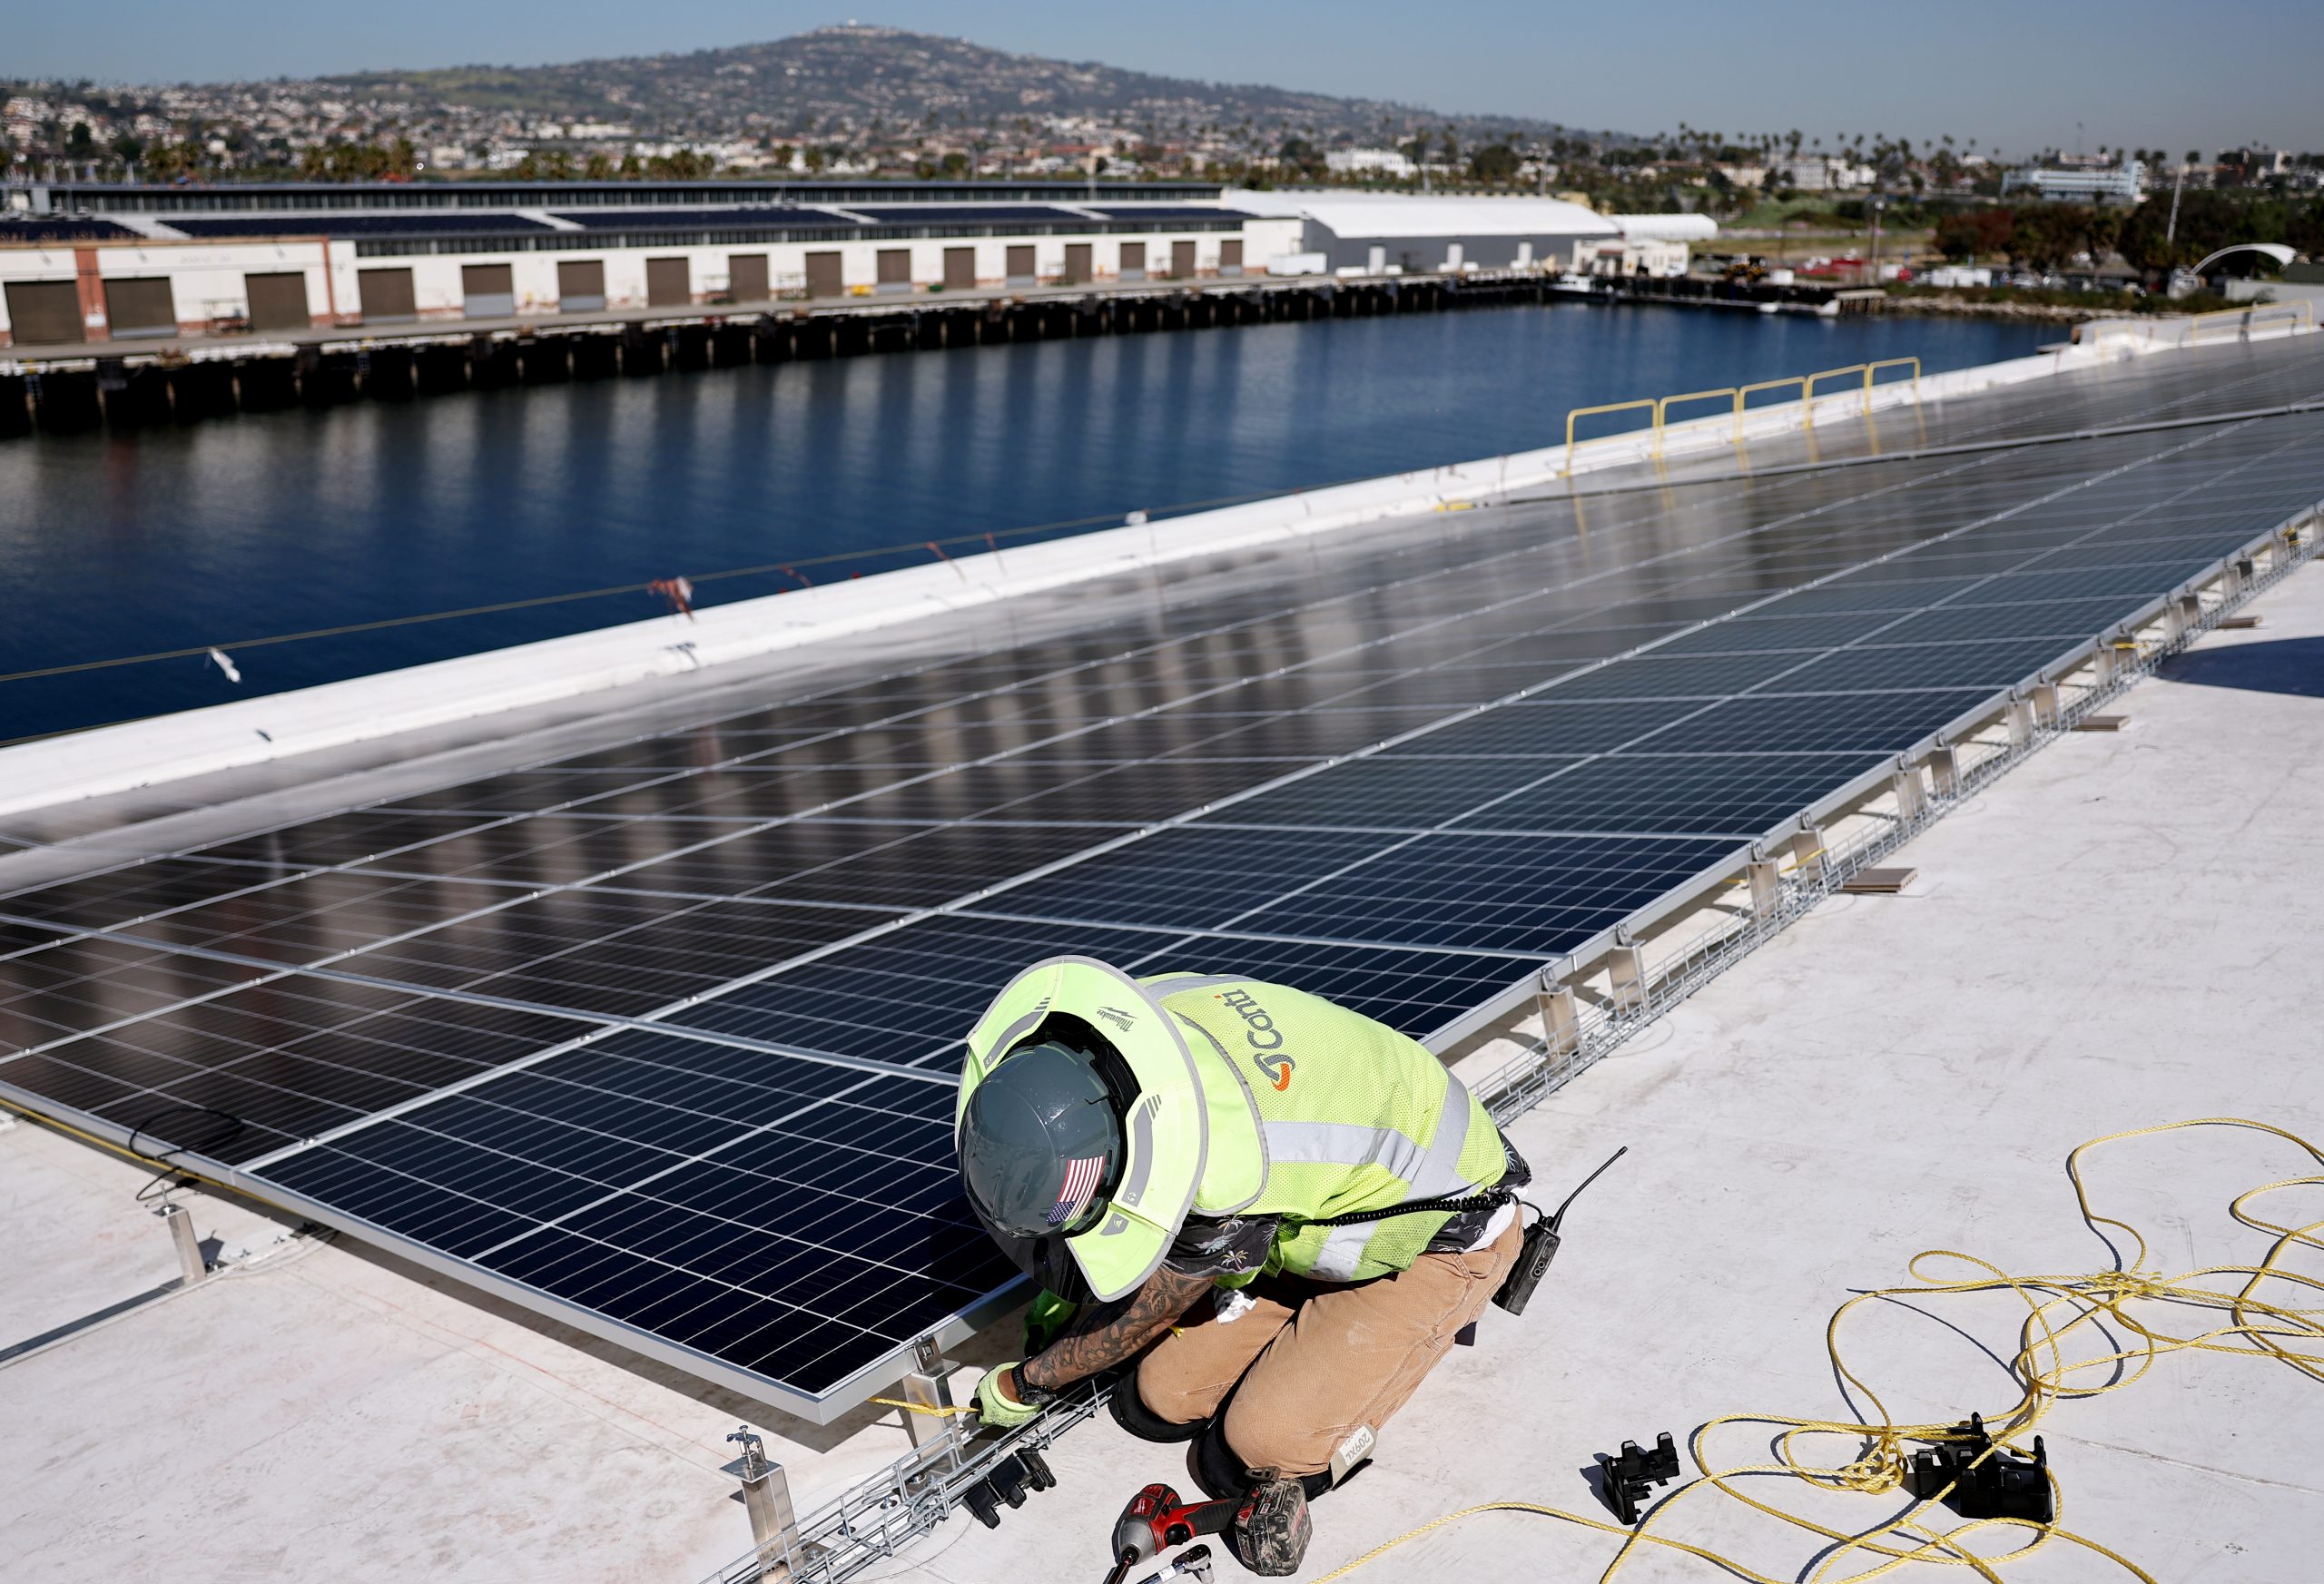 Large Scale Solar Power Unit Installed At Los Angeles Port Location Of Ocean Studies Company AltaSea